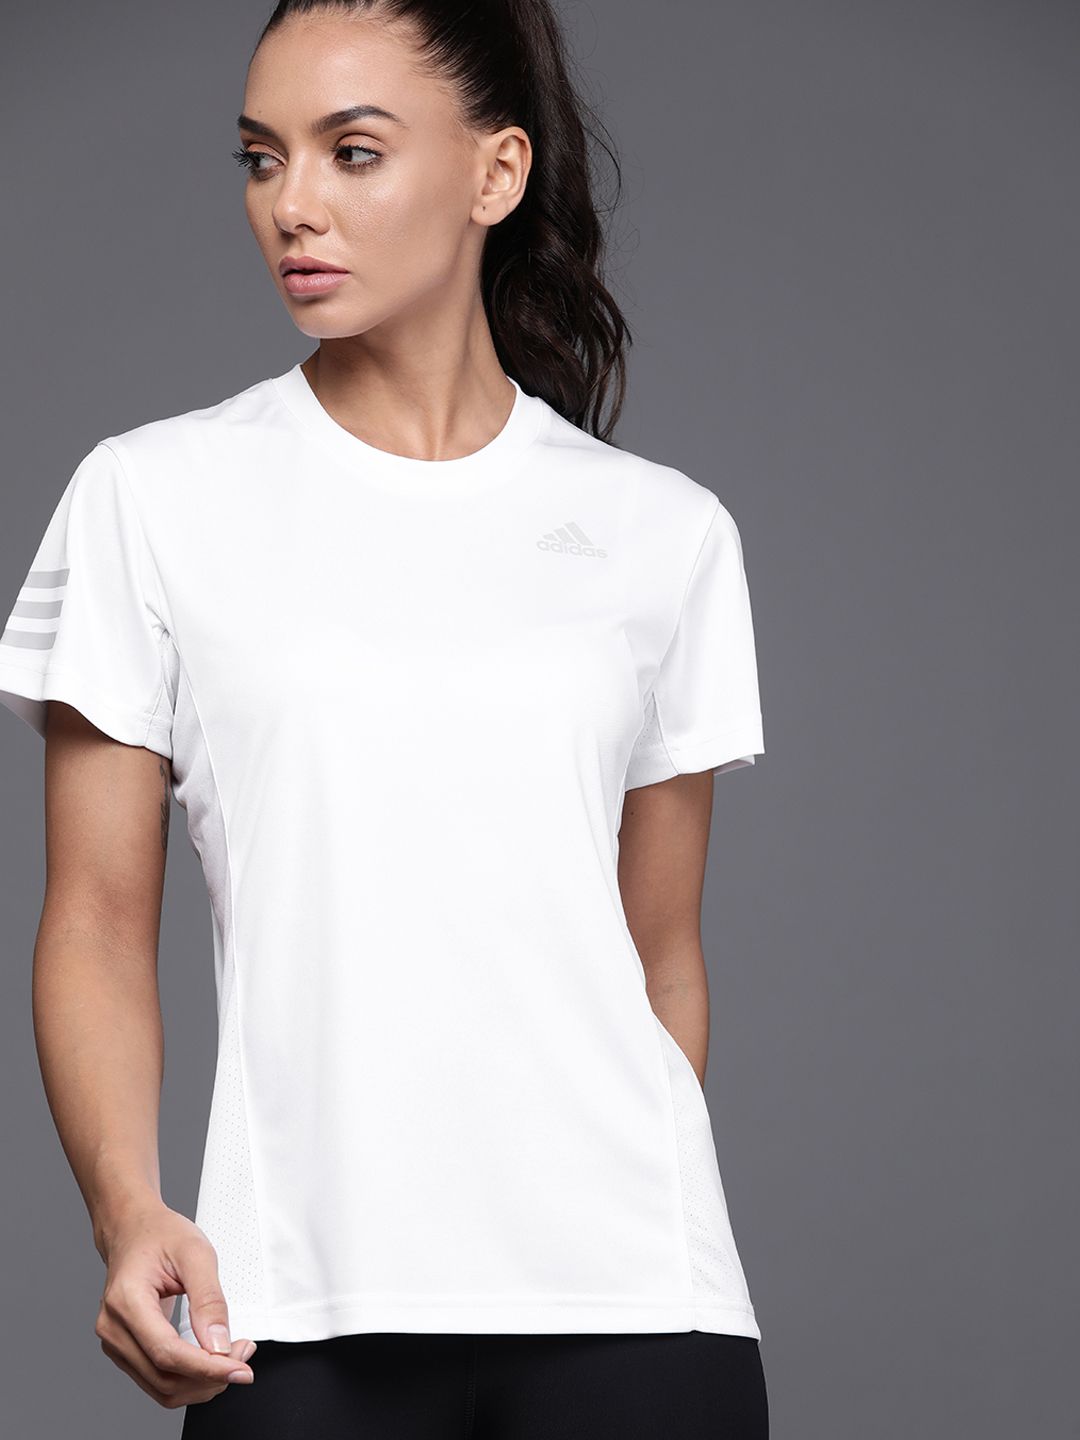 ADIDAS Women White Club Solid Tennis Sustainable T-shirt Price in India